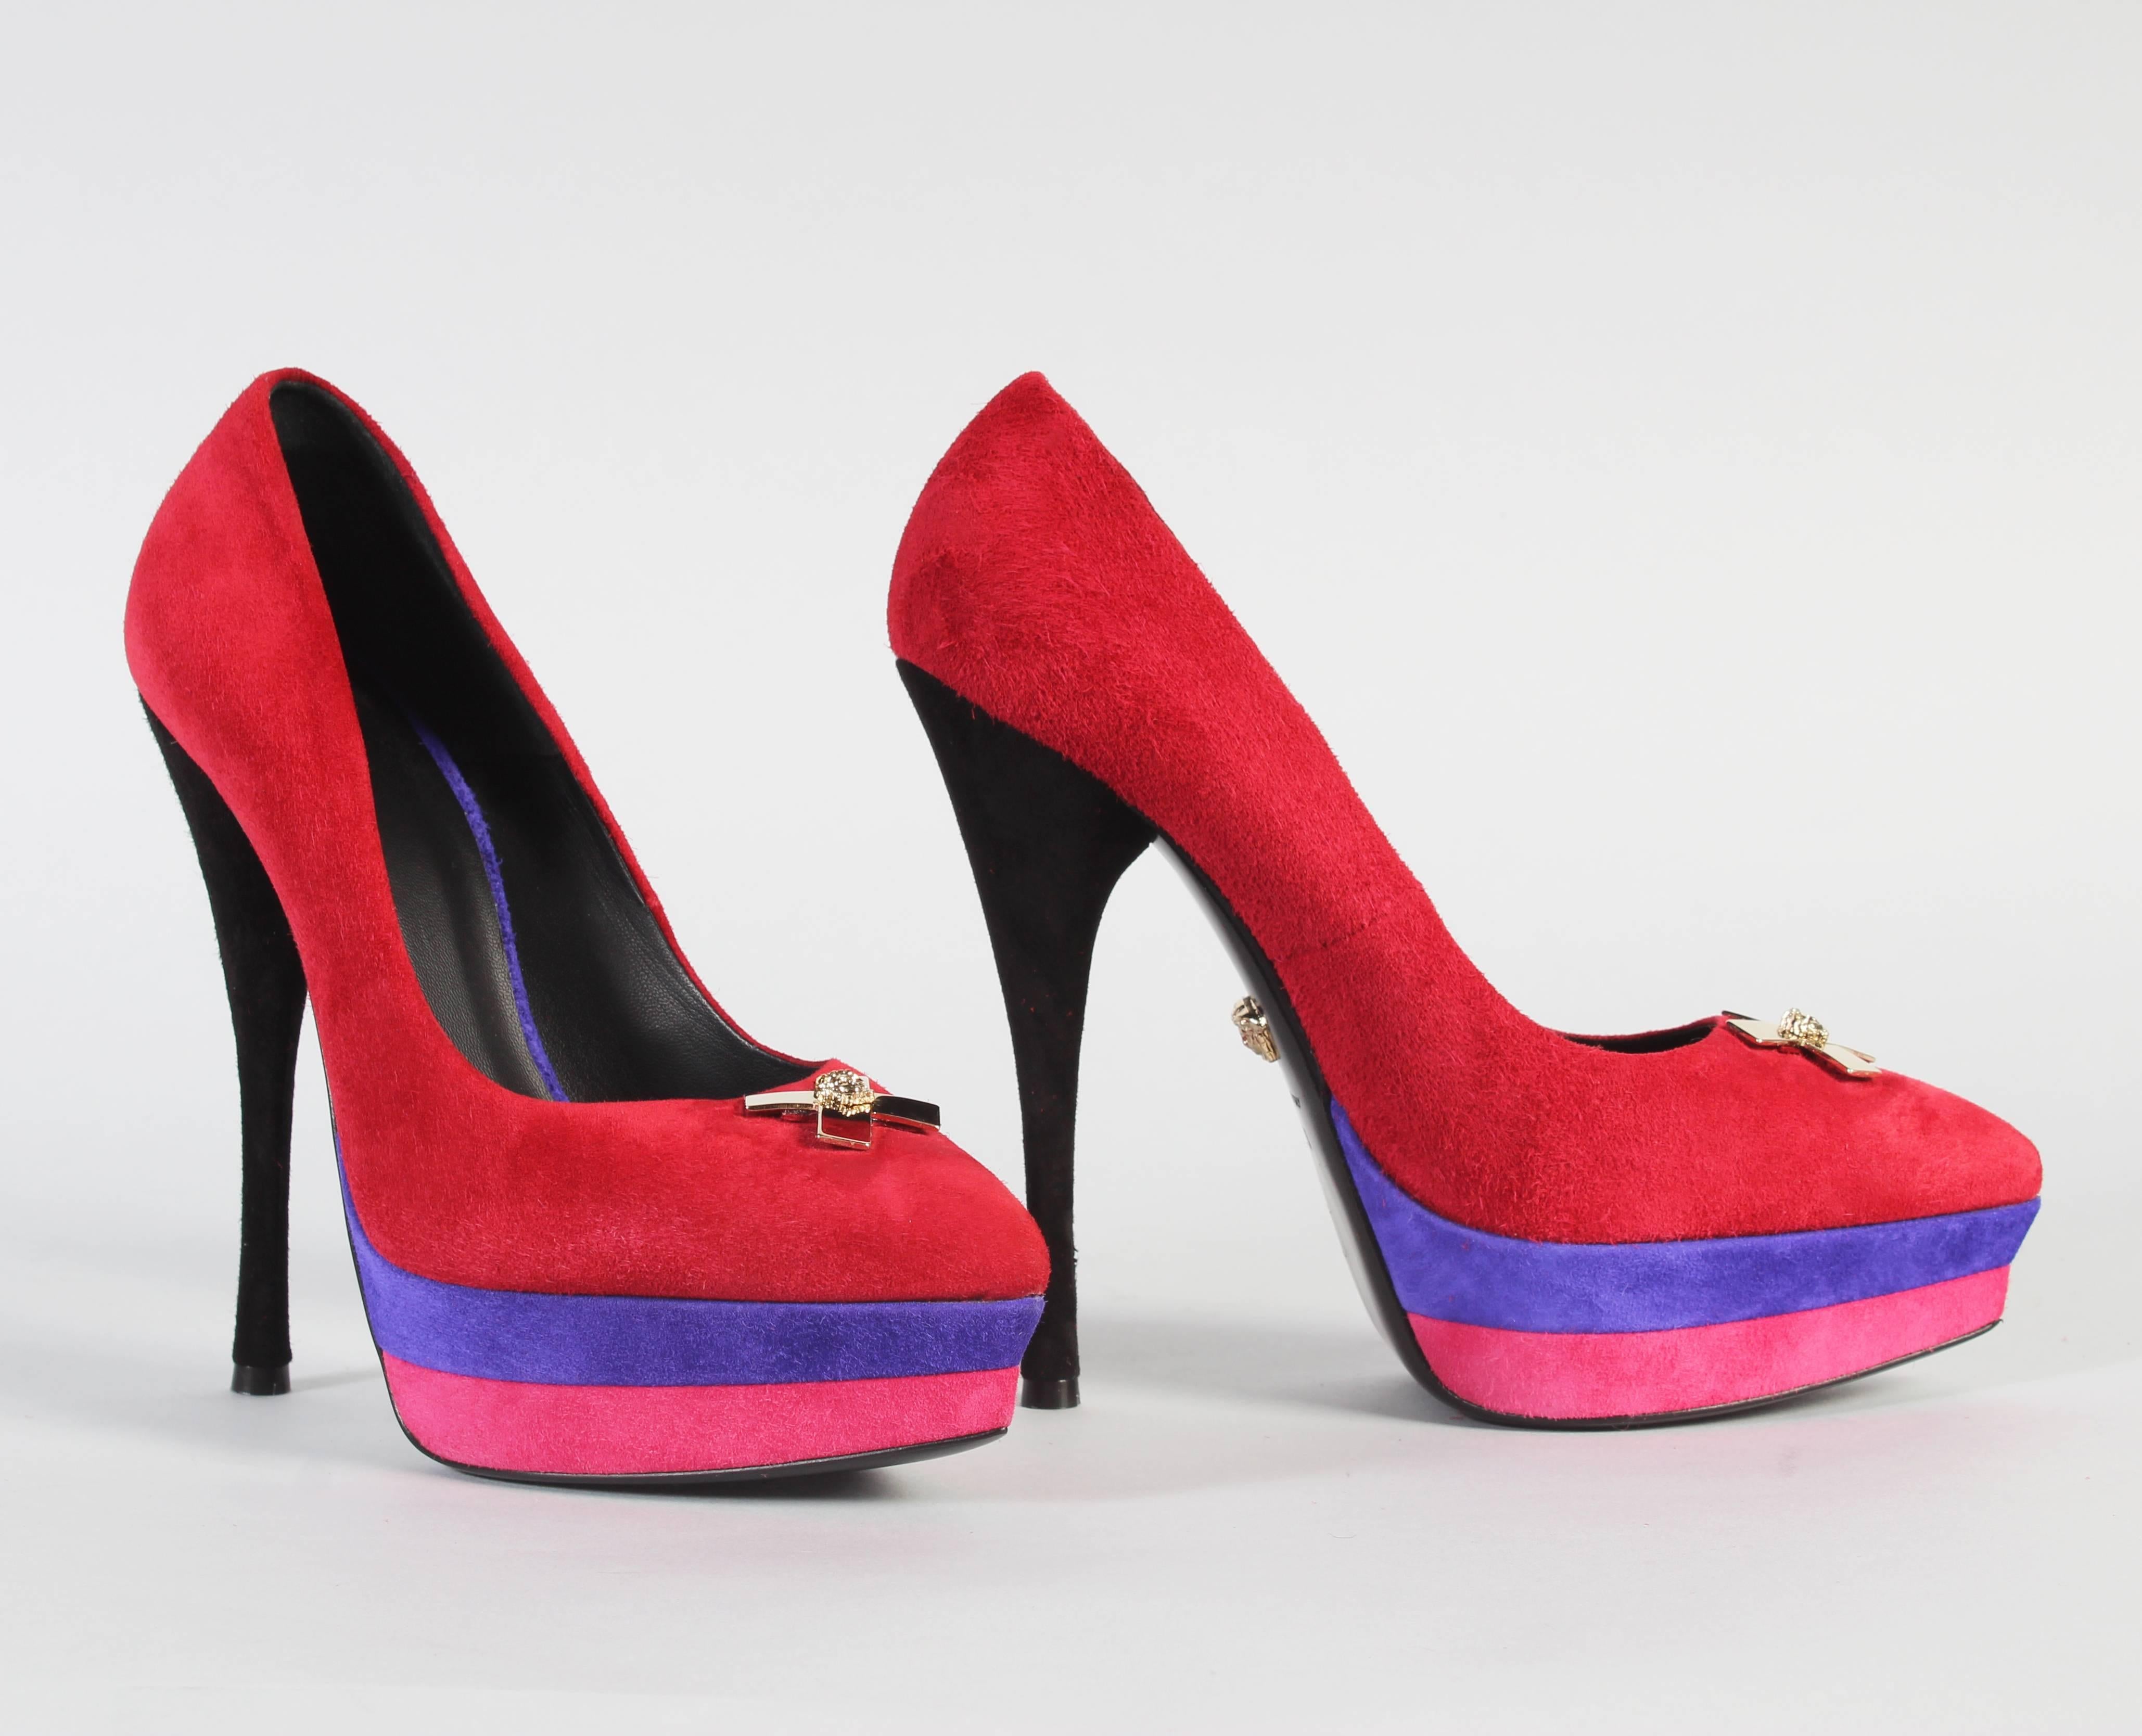 Versace 


Palazzo Color Stack Pump

High heel, multi-color, suede leather pumps from the Palazzo line, 

with a color stacked platform, central Medusa Head and pointed toe.



Closed, pointed toe
Color stacked sole
Central Medusa Head
100%